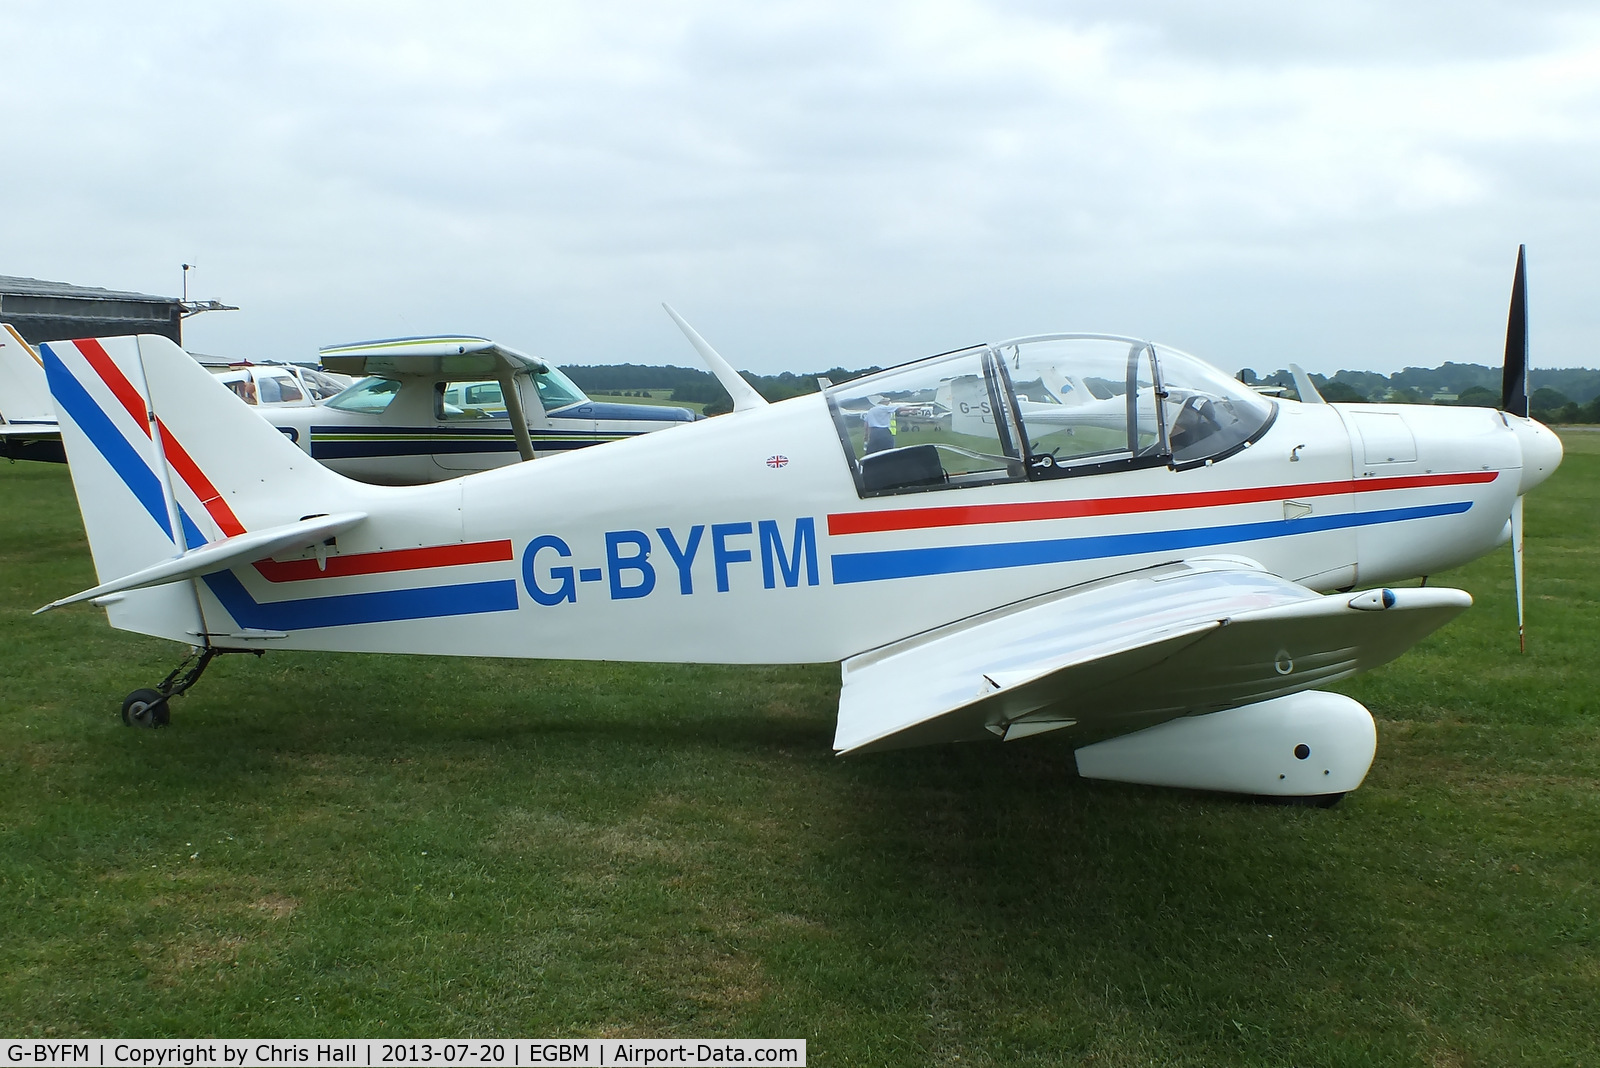 G-BYFM, 2000 Jodel DR-1050 M1 Excellence Replica C/N PFA 304-13237, at the Tatenhill Charity Fly in